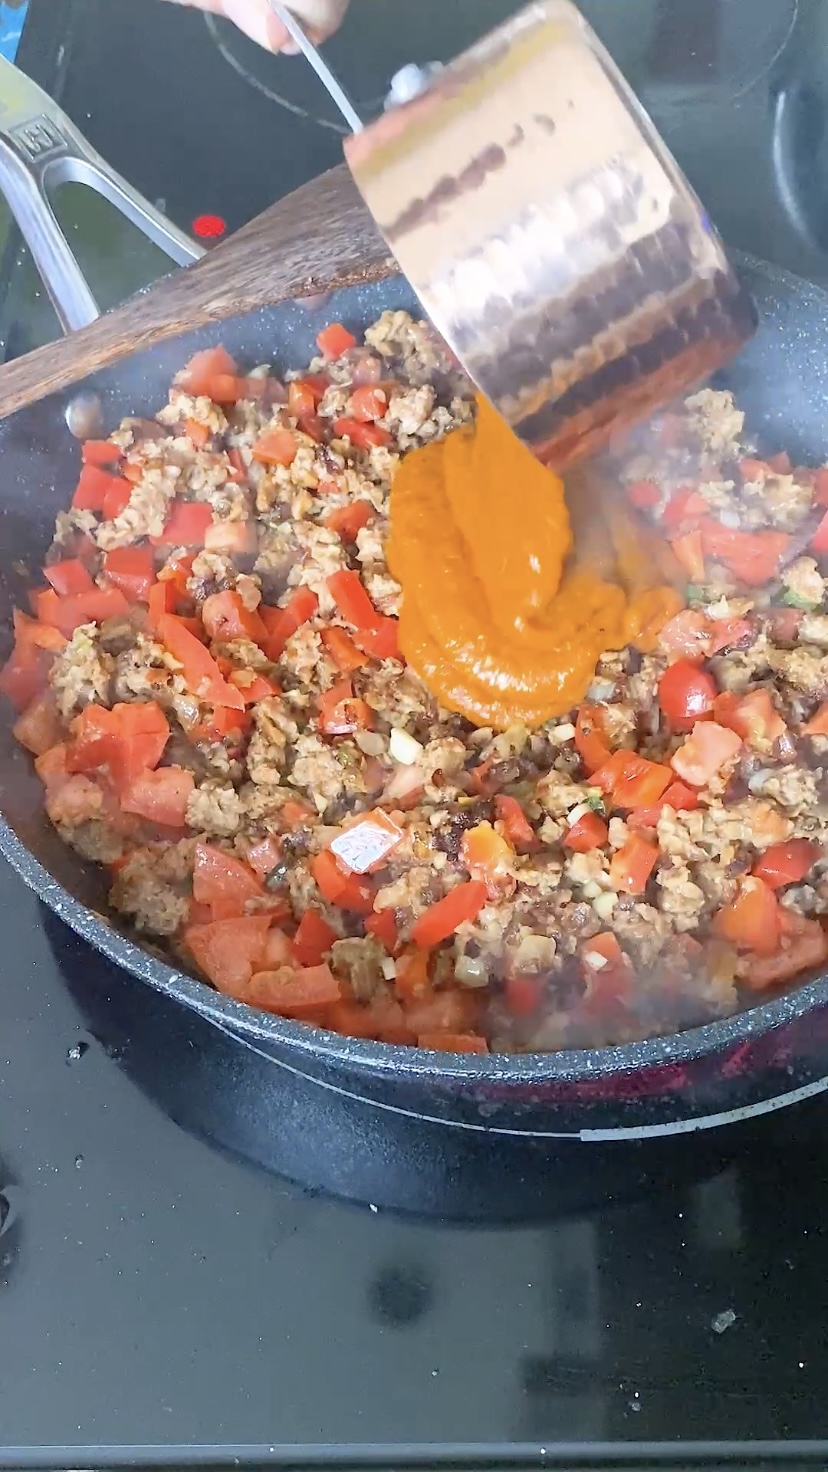 Adding enchilada sauce to a skillet of cooked beyond beef and vegetables.